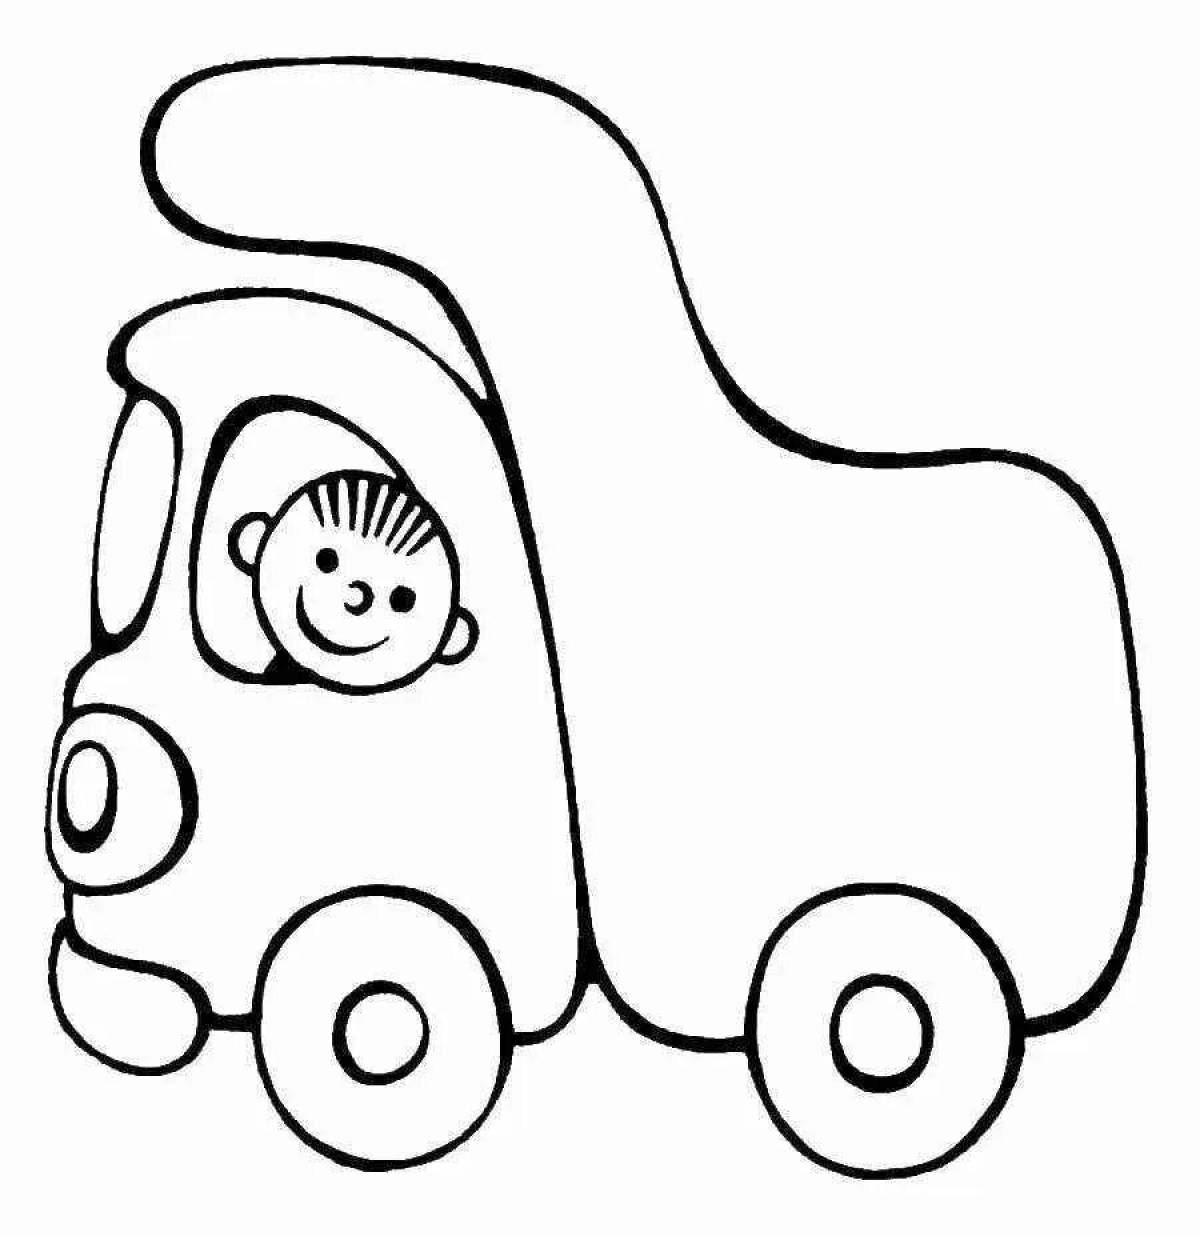 Fun coloring truck for 3-4 year olds